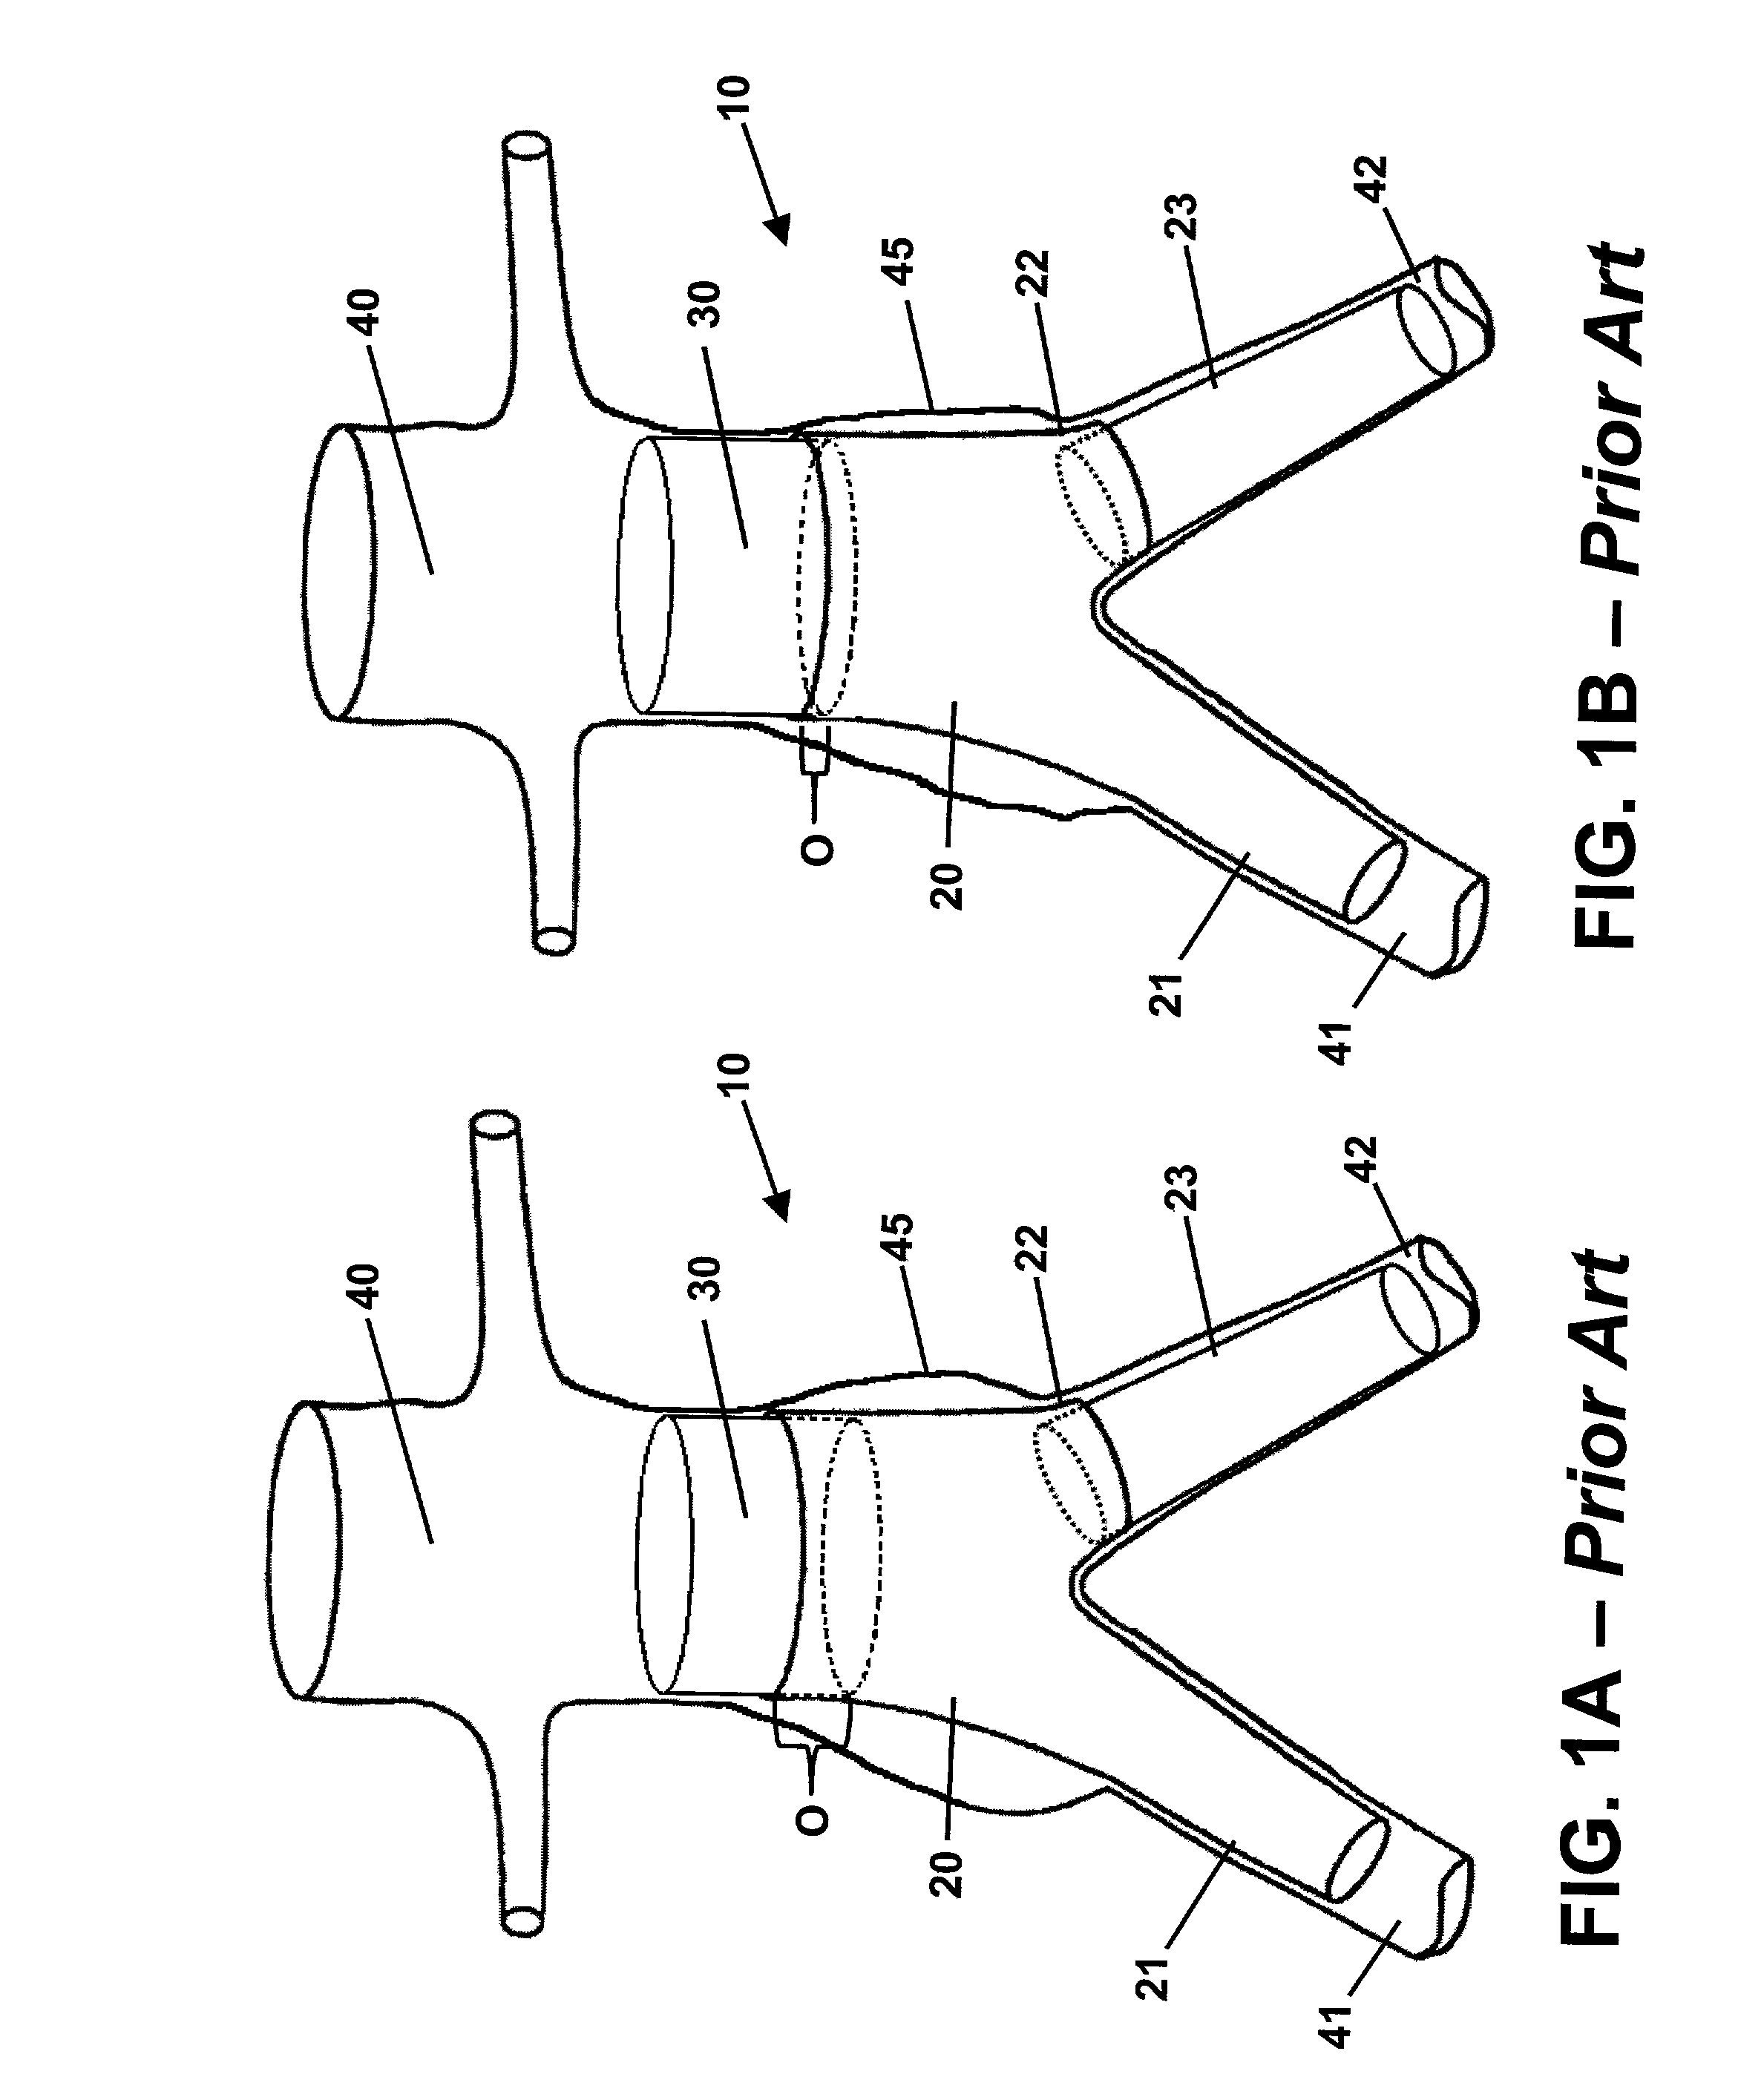 Endoluminal prosthetic assembly and extension method